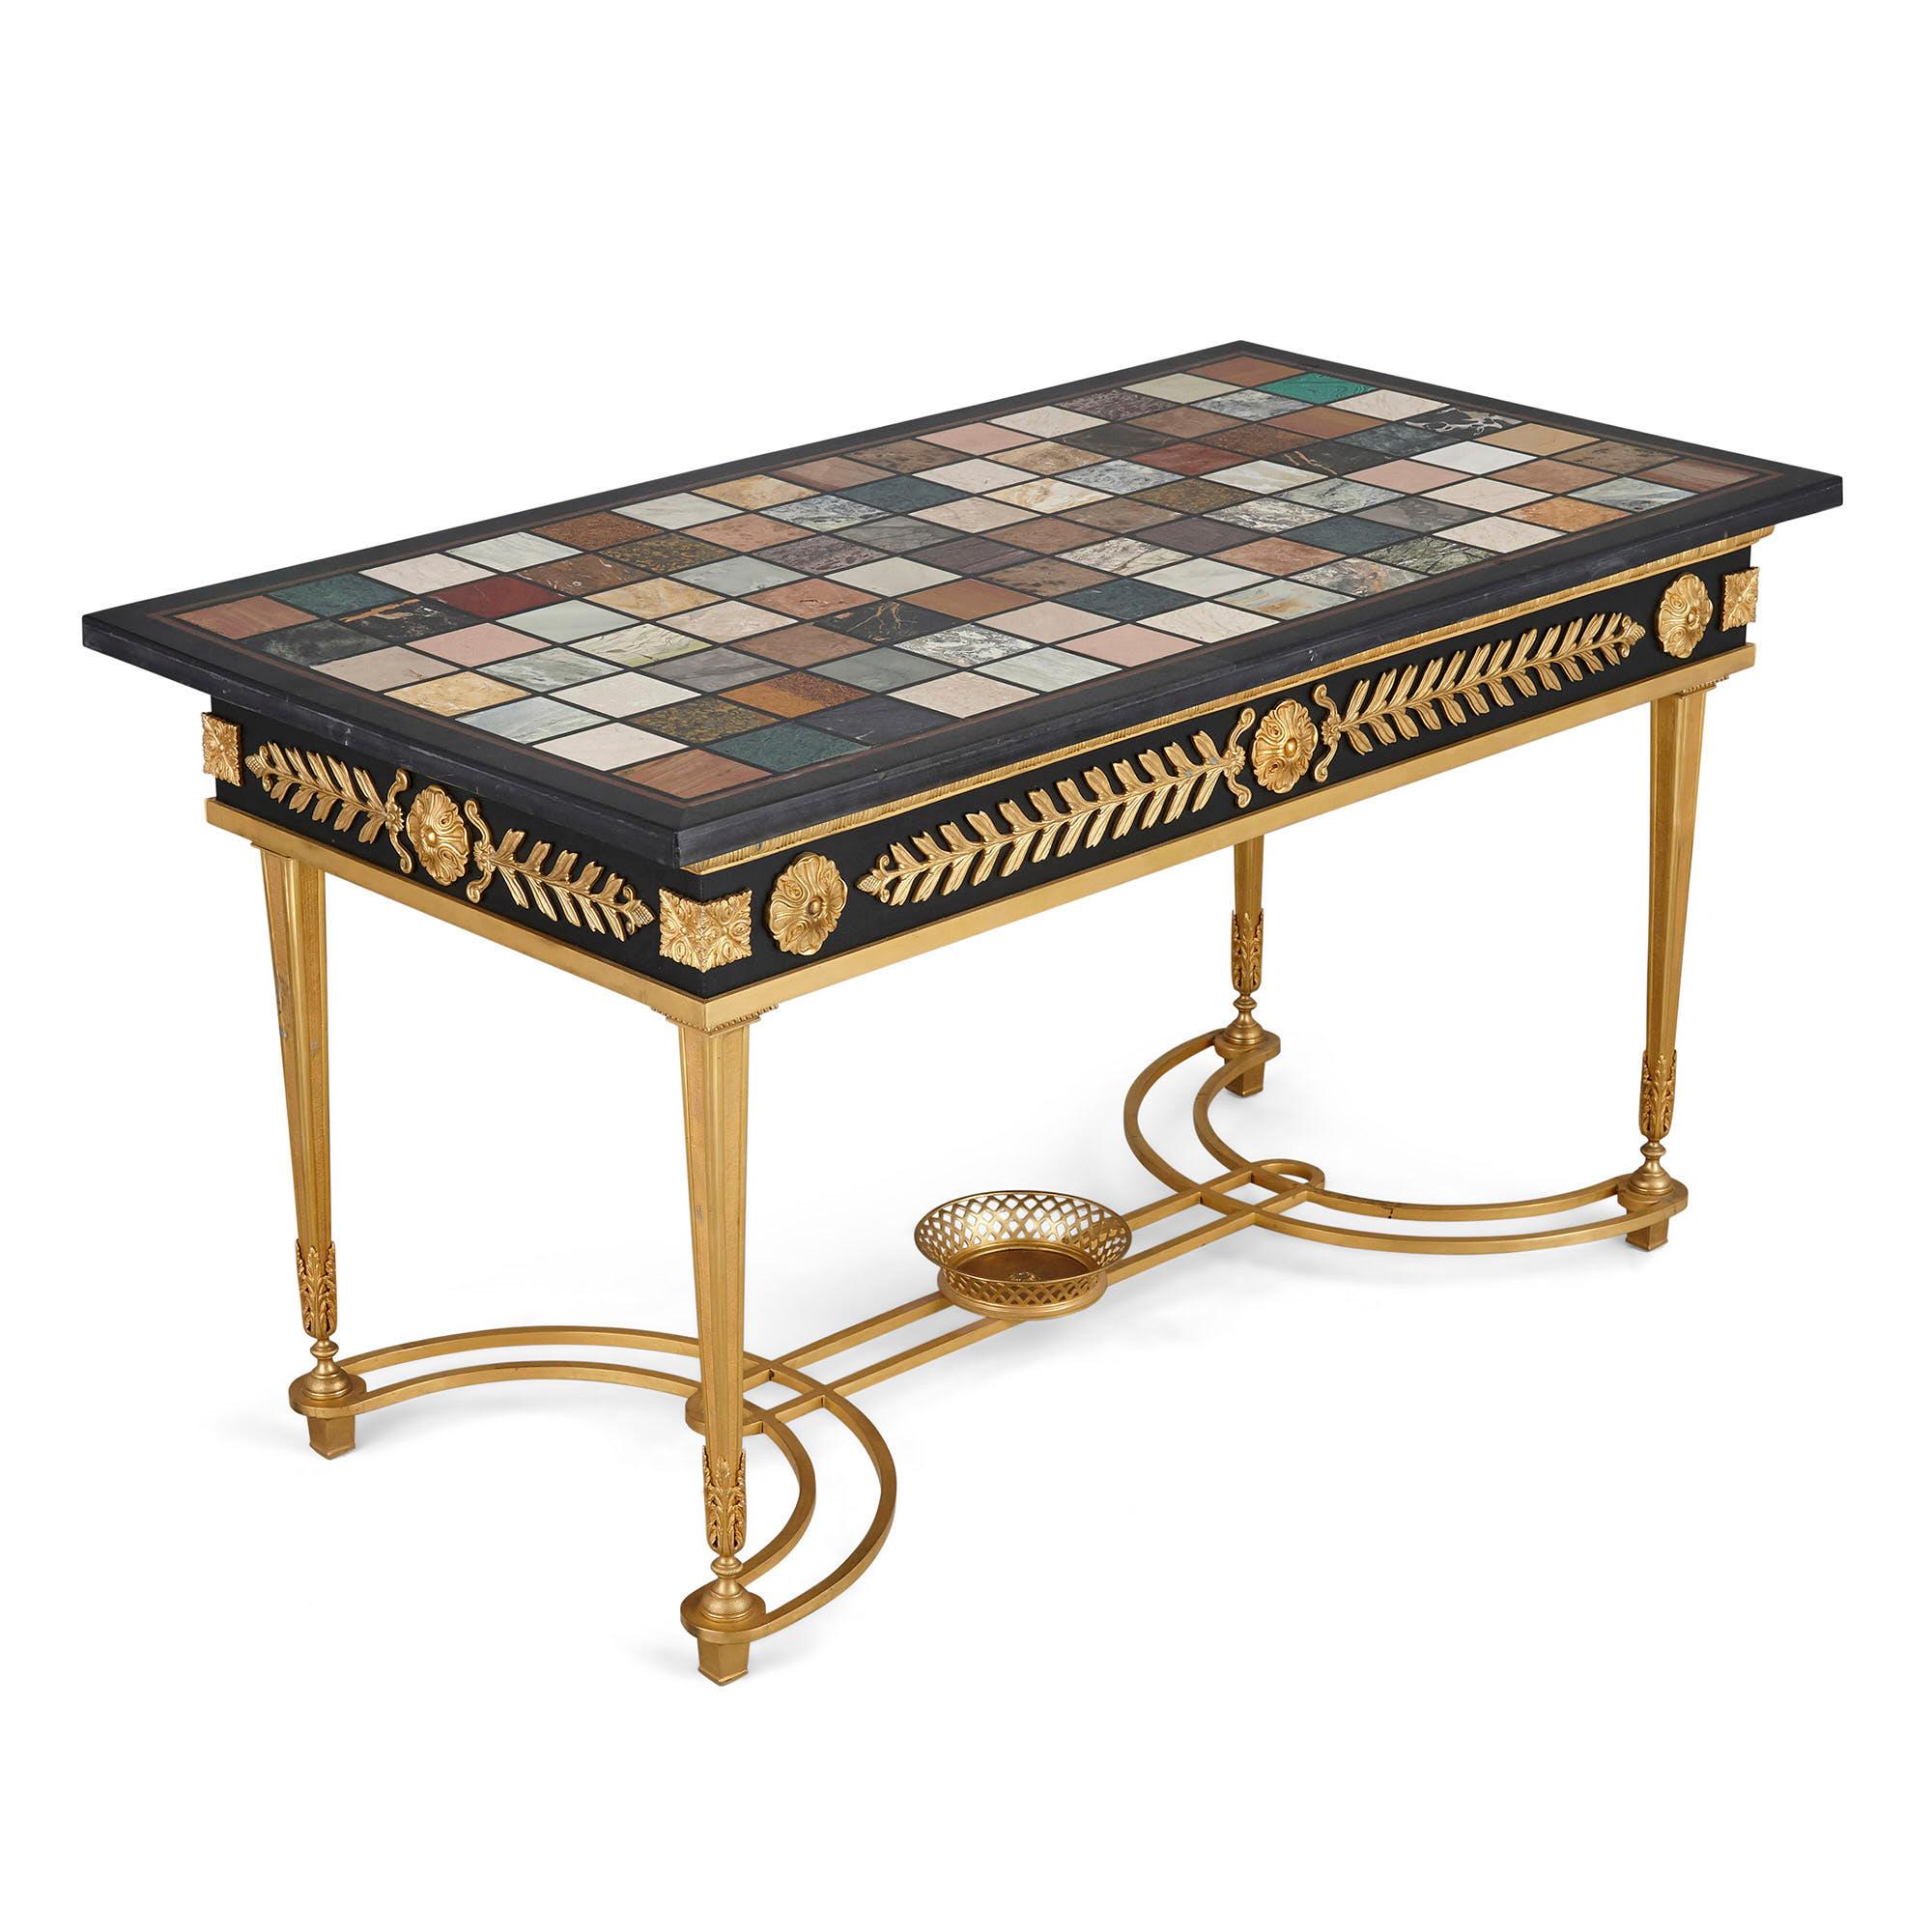 Neoclassical style coffee table with Italian marble specimen top
French, 20th century
Dimensions: Height 56cm, width 102cm, 54cm

The present coffee table is wrought in the French neoclassical style, with square tapered ormolu legs connected by